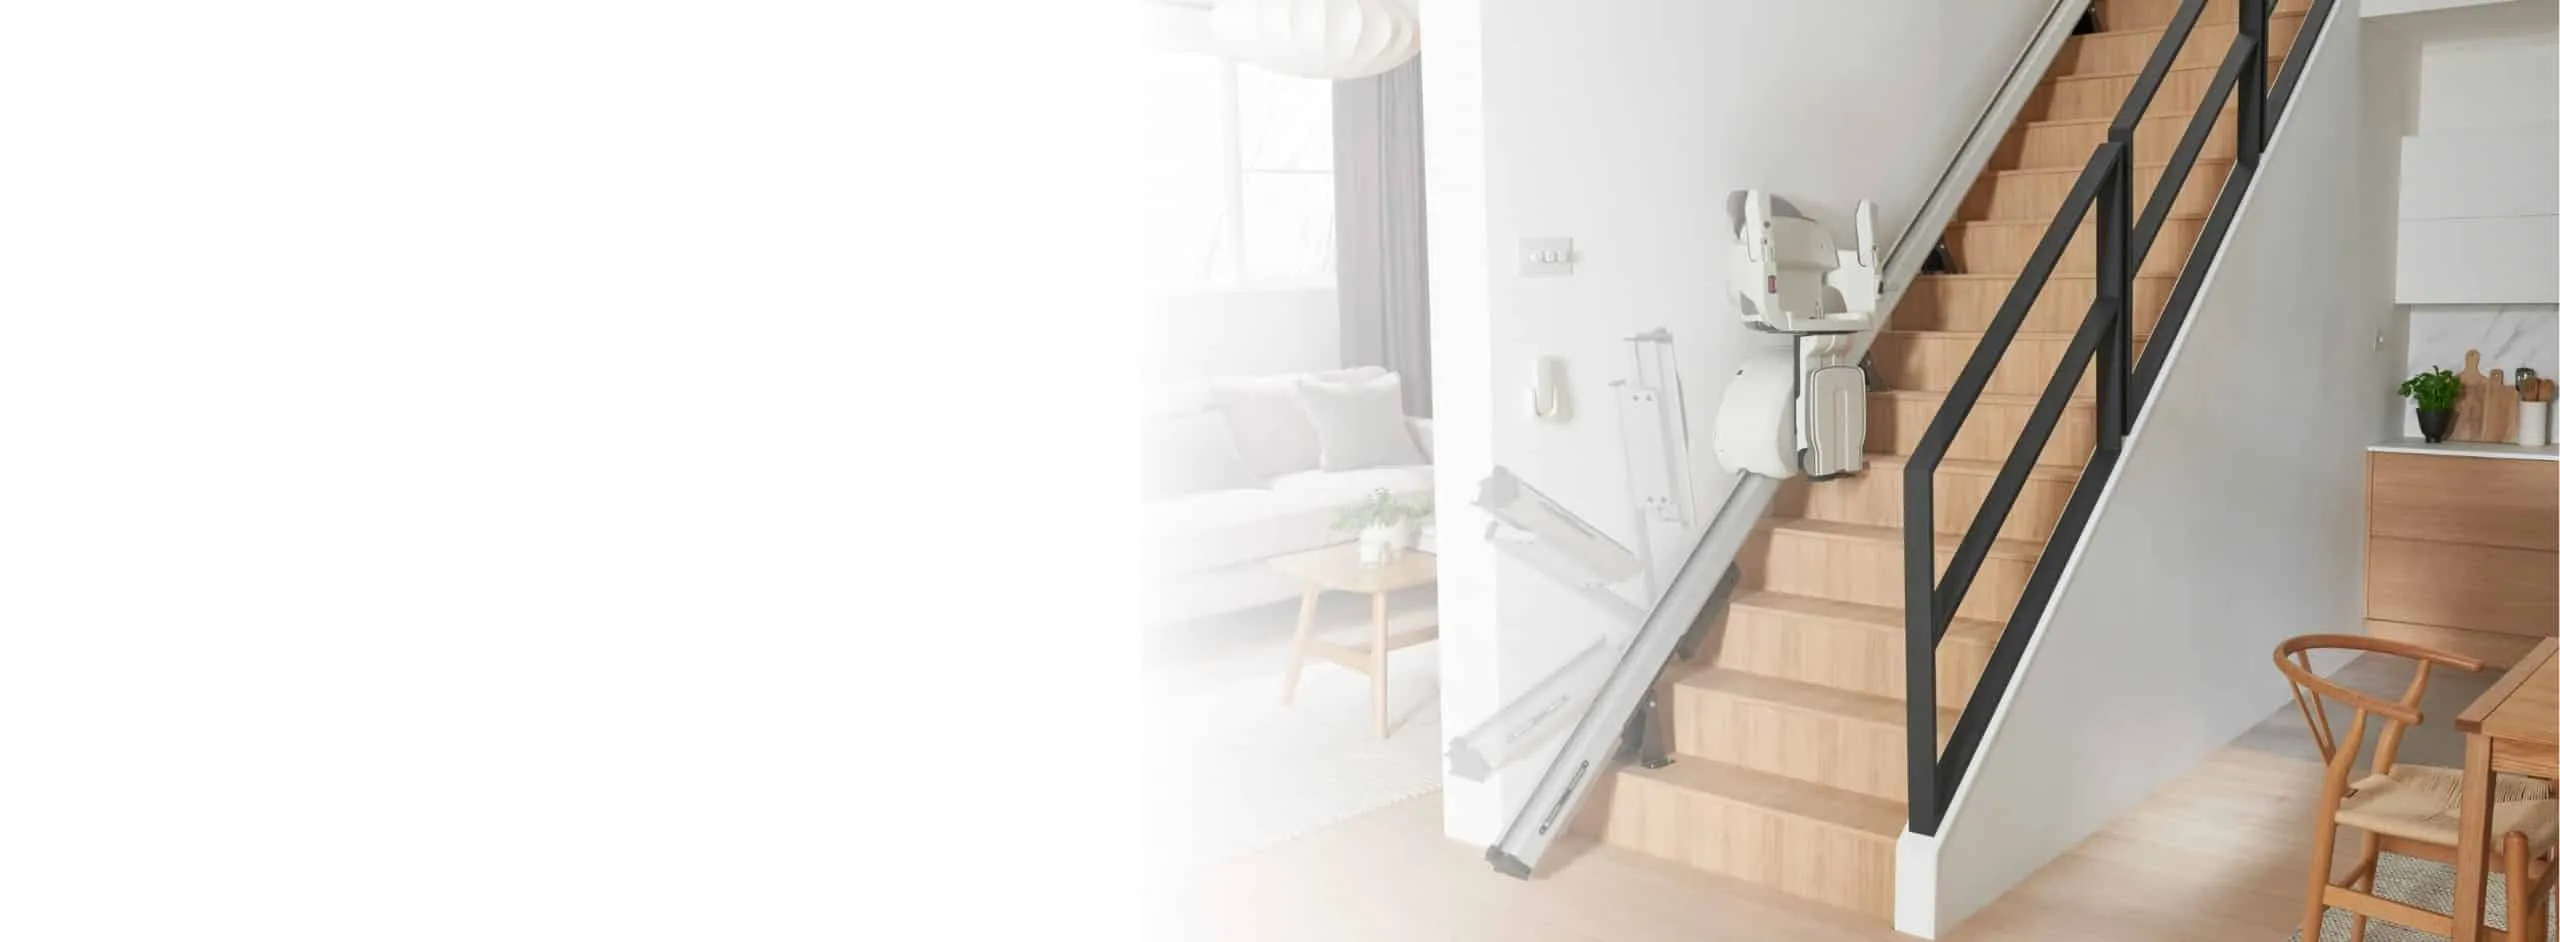 Access homeglide straight stairlift scaled